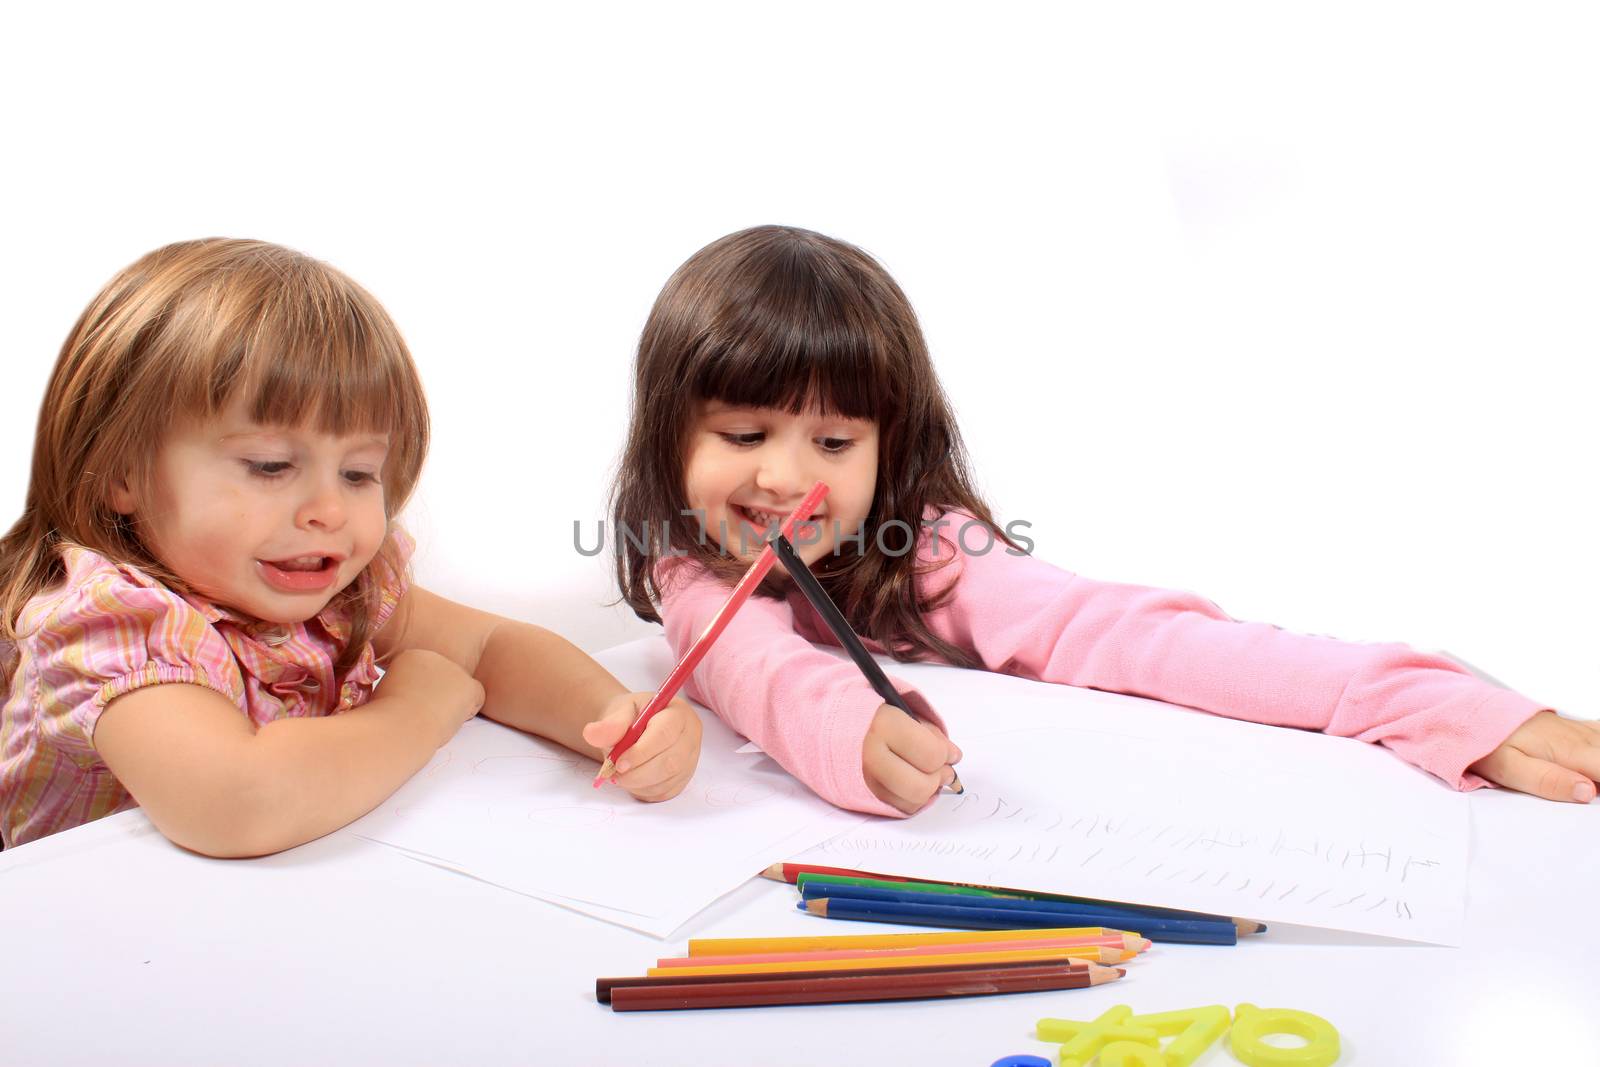 Two little preschool girls drawing with colorful pencil crayons